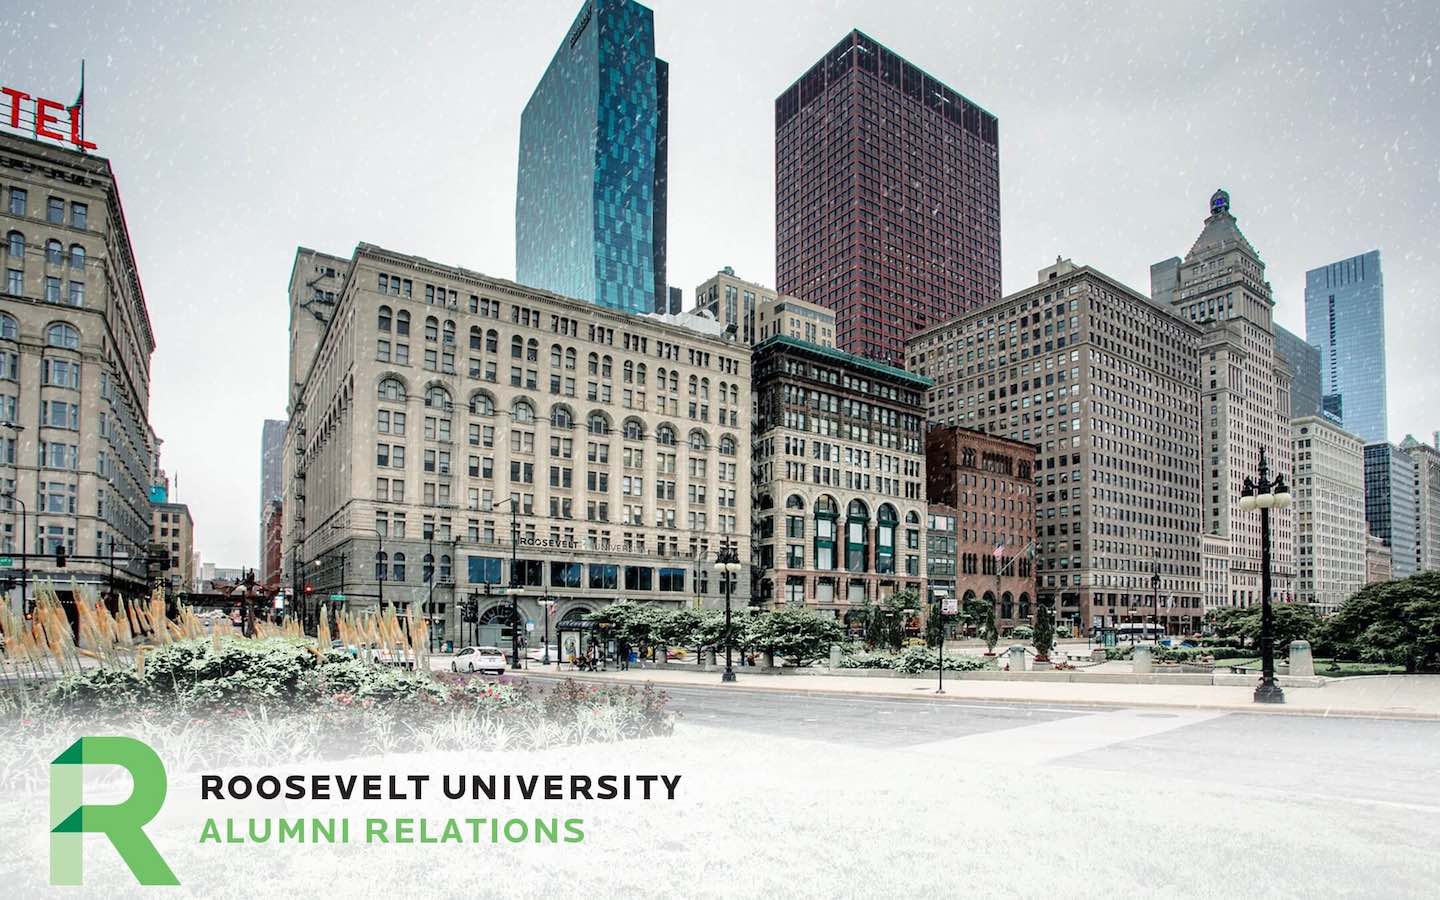 Michigan Avenue and Roosevelt University in the snow